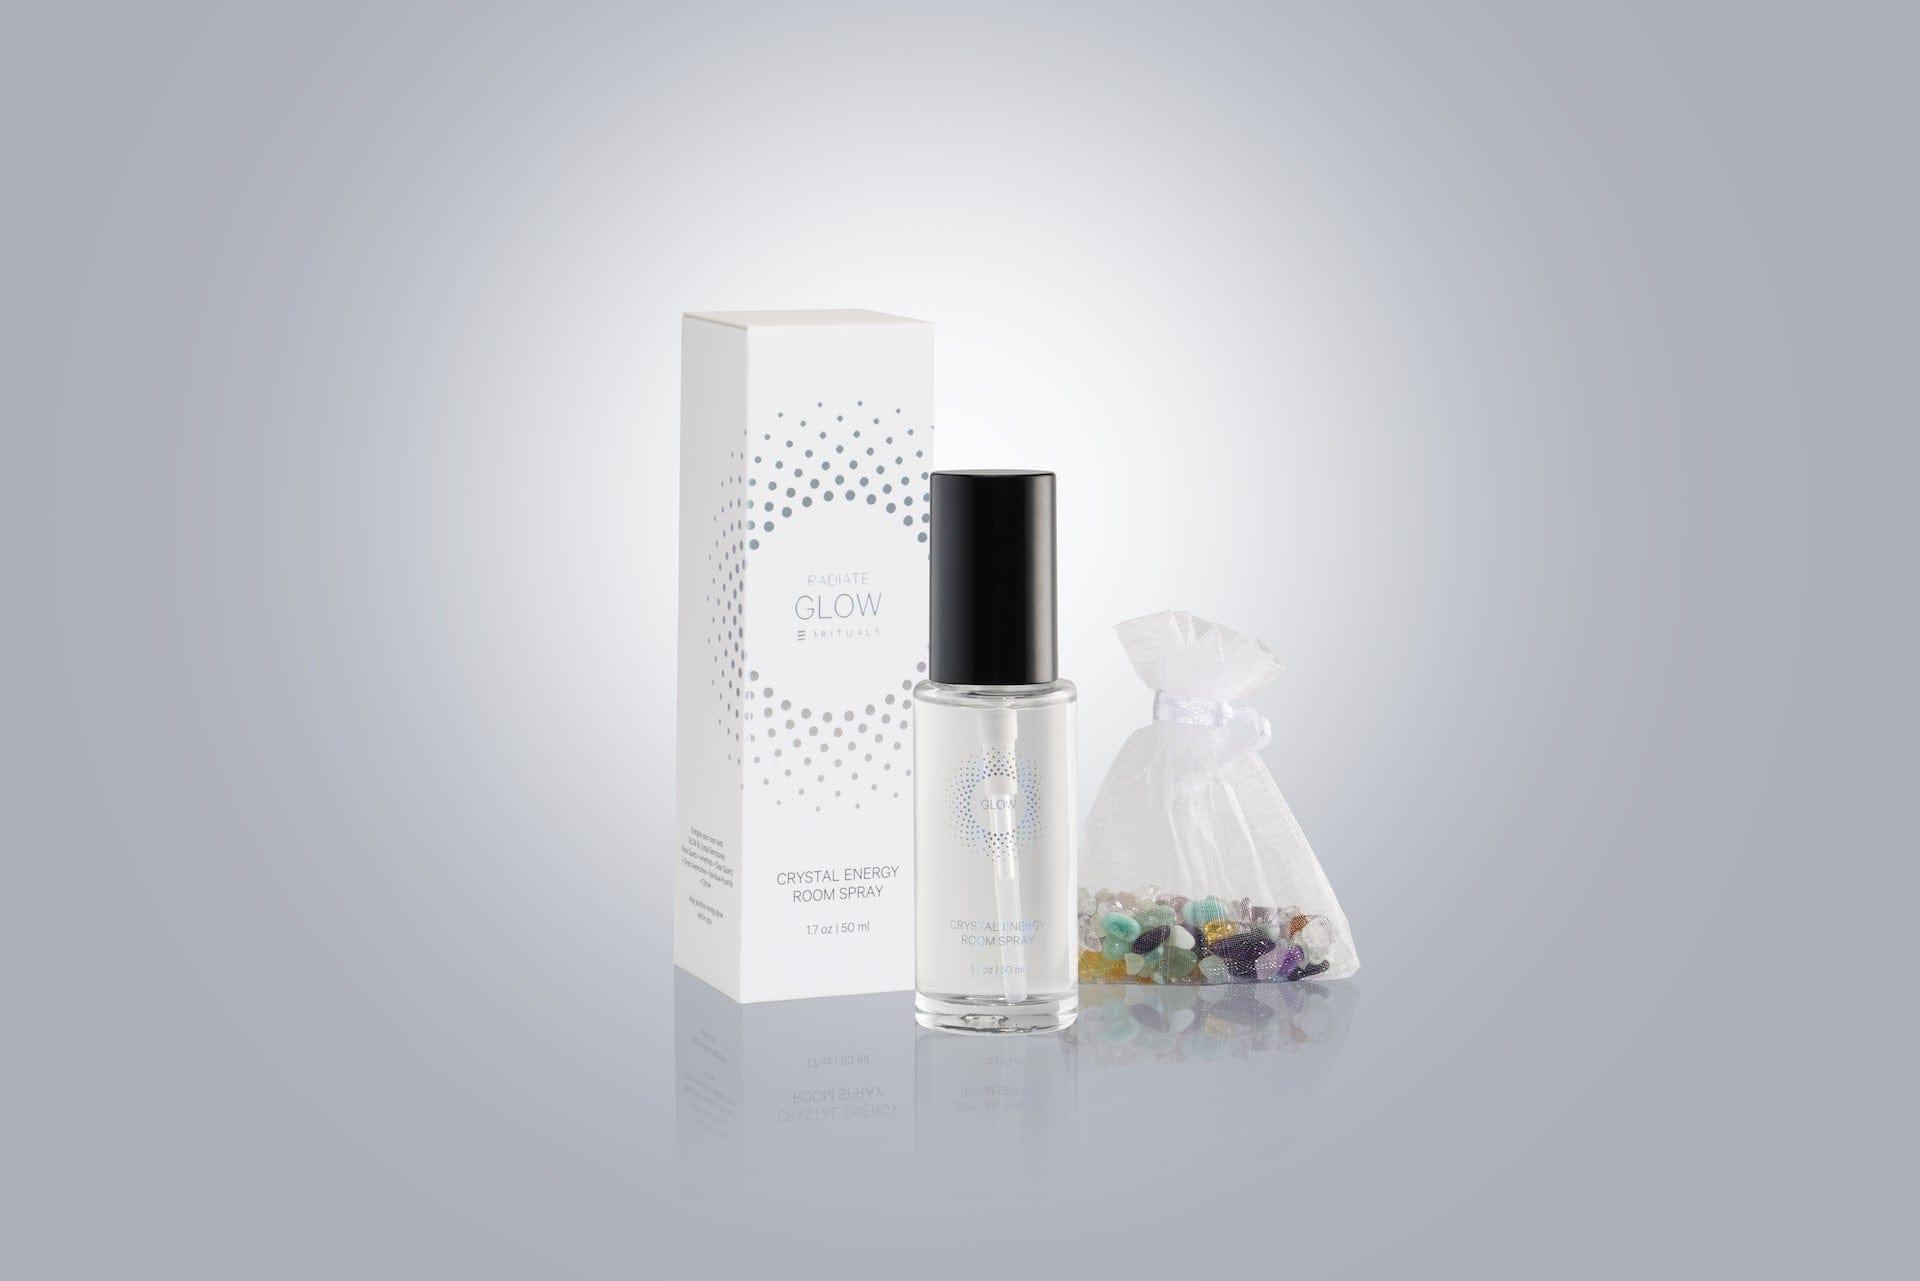 Glow Room Spray with Crystal Gemstones - 3Rituals